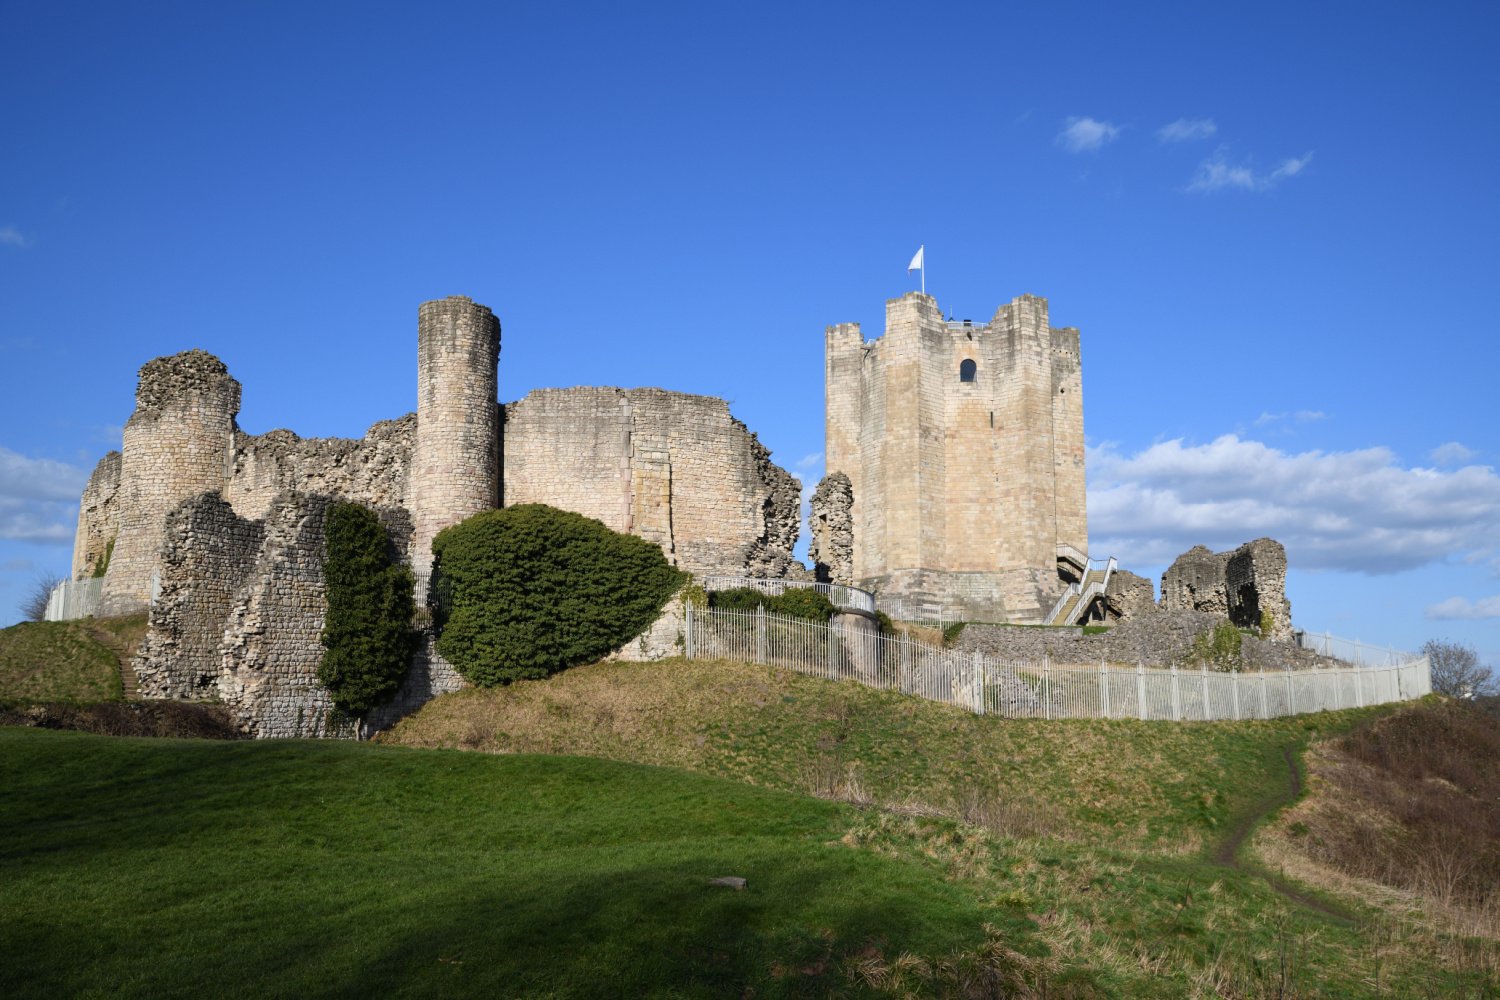 Image name conisbrough castle near doncaster south yorkshire the 24 image from the post A look at the history of Conisbrough Castle, with Dr Emma Wells in Yorkshire.com.